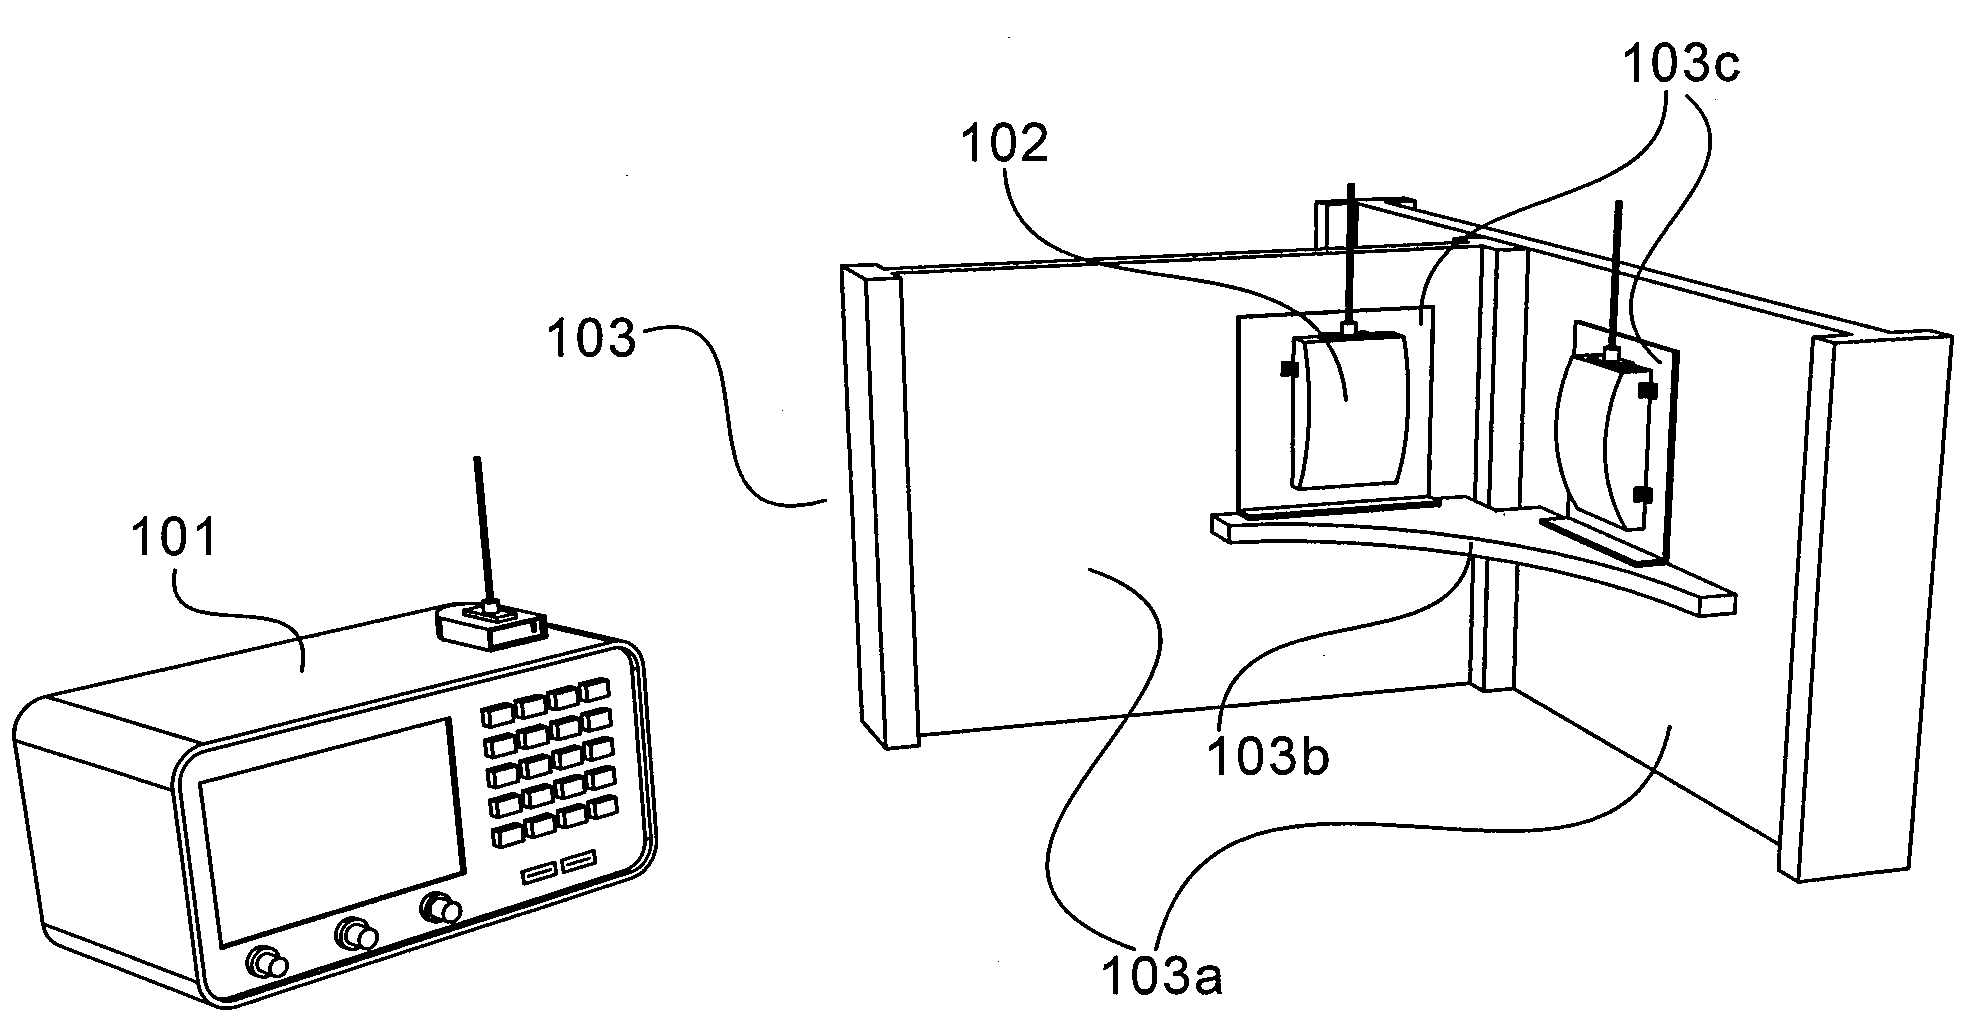 Enhanced wireless eddy current probe for a non-destructive inspection system